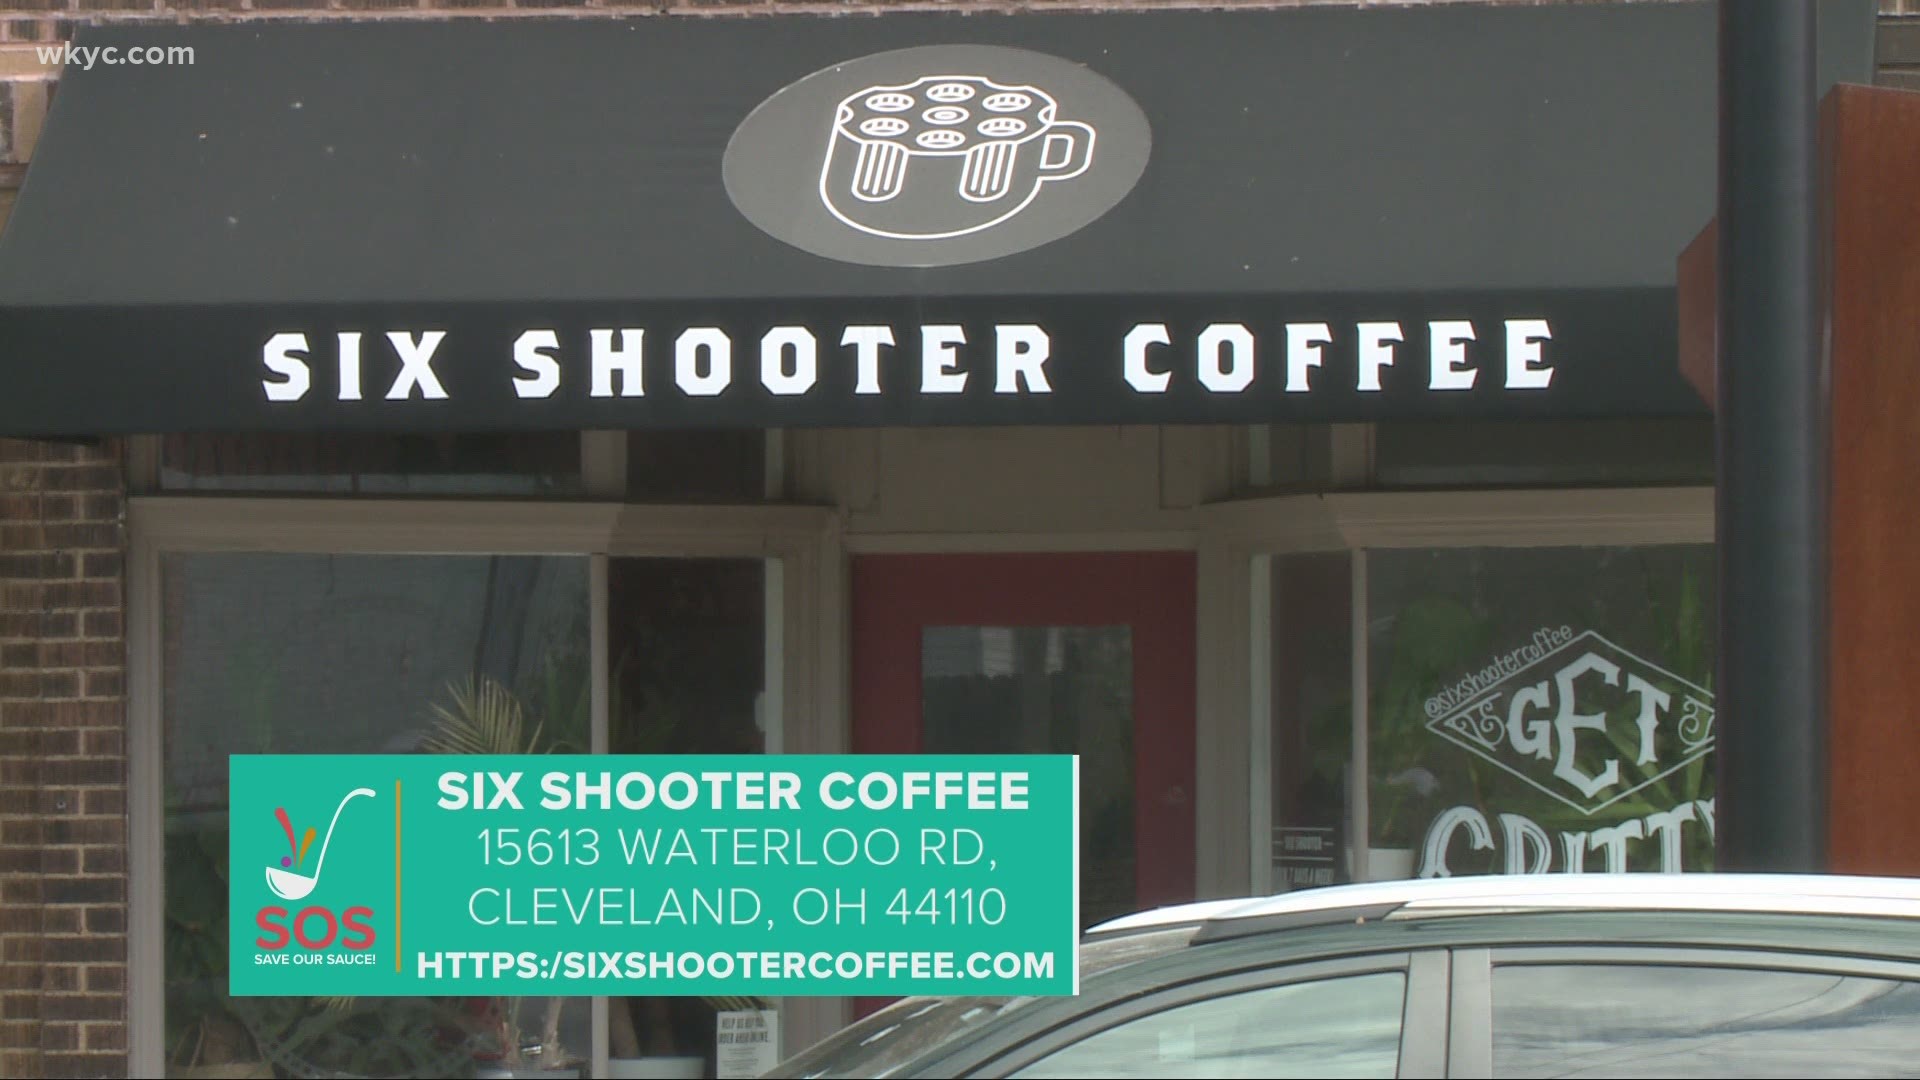 Looking for the best coffee in Cleveland? Today we're highlighting Six Shooter Coffee in the ongoing 'Save Our Sauce' campaign.